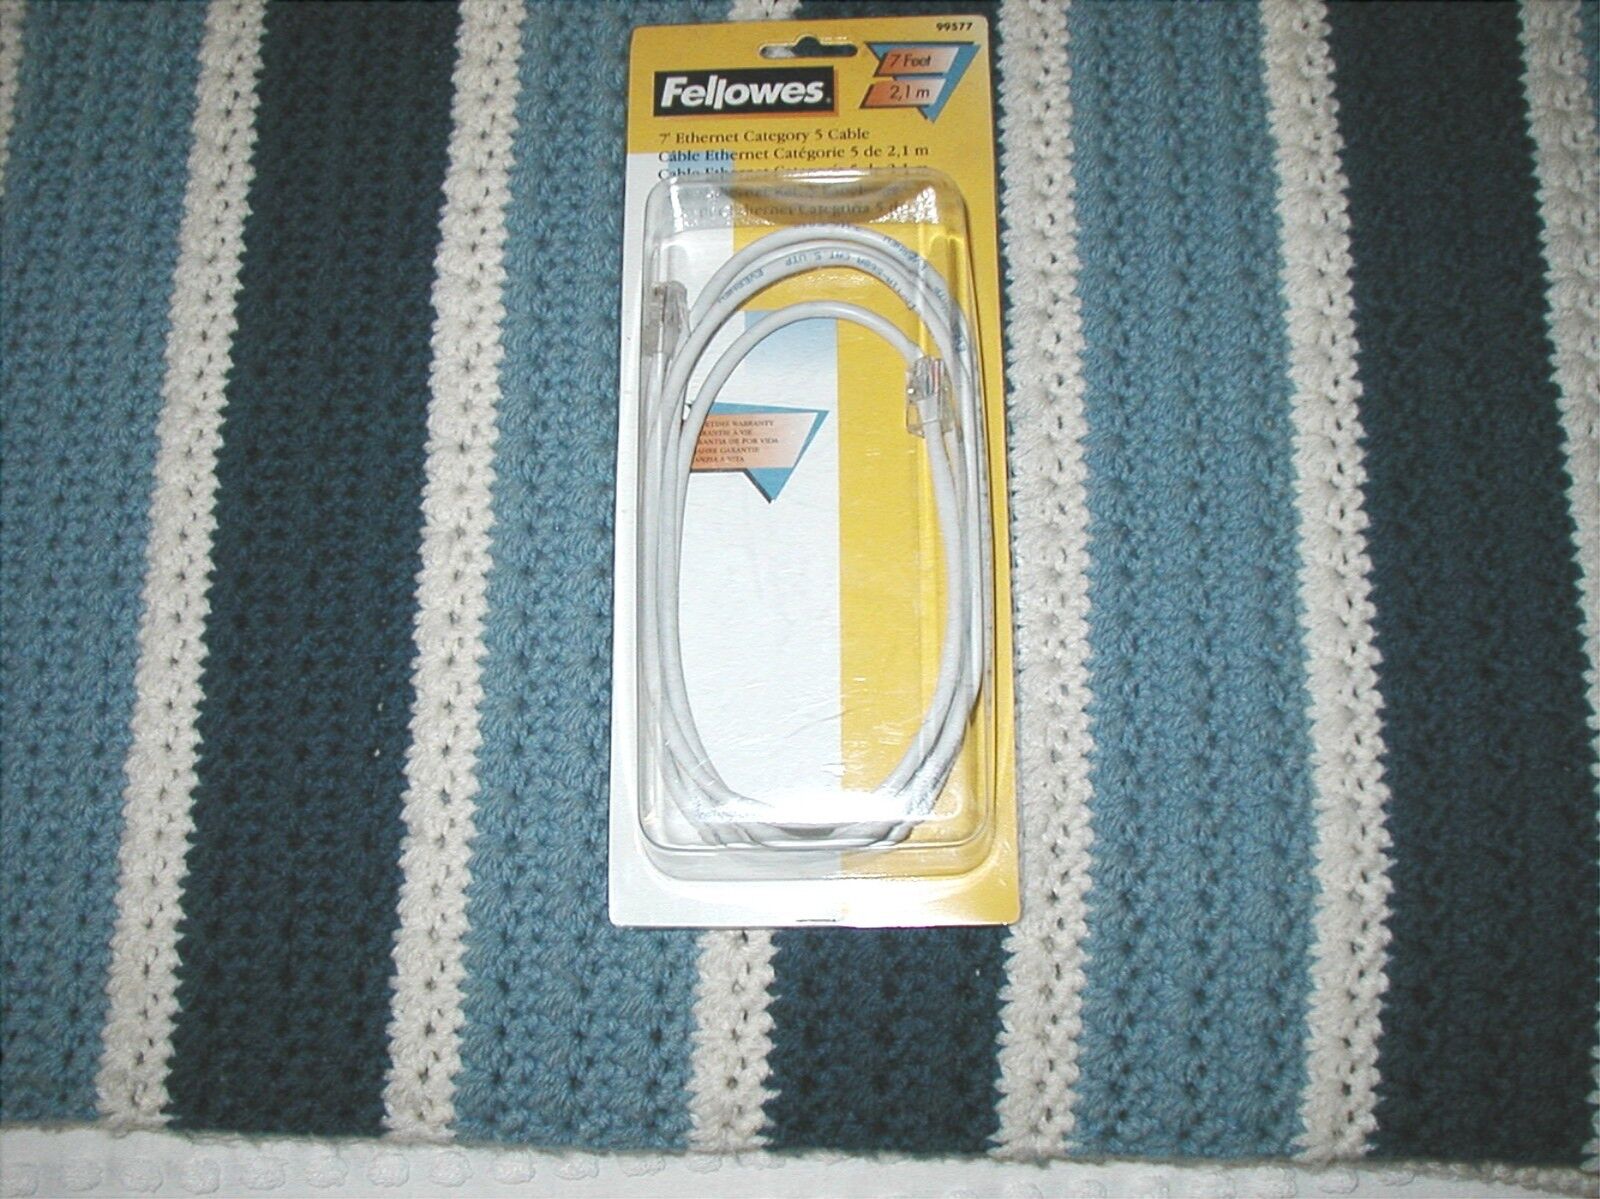 FELLOWES 7 Foot Ethernet Cat 5 Cable RJ-45